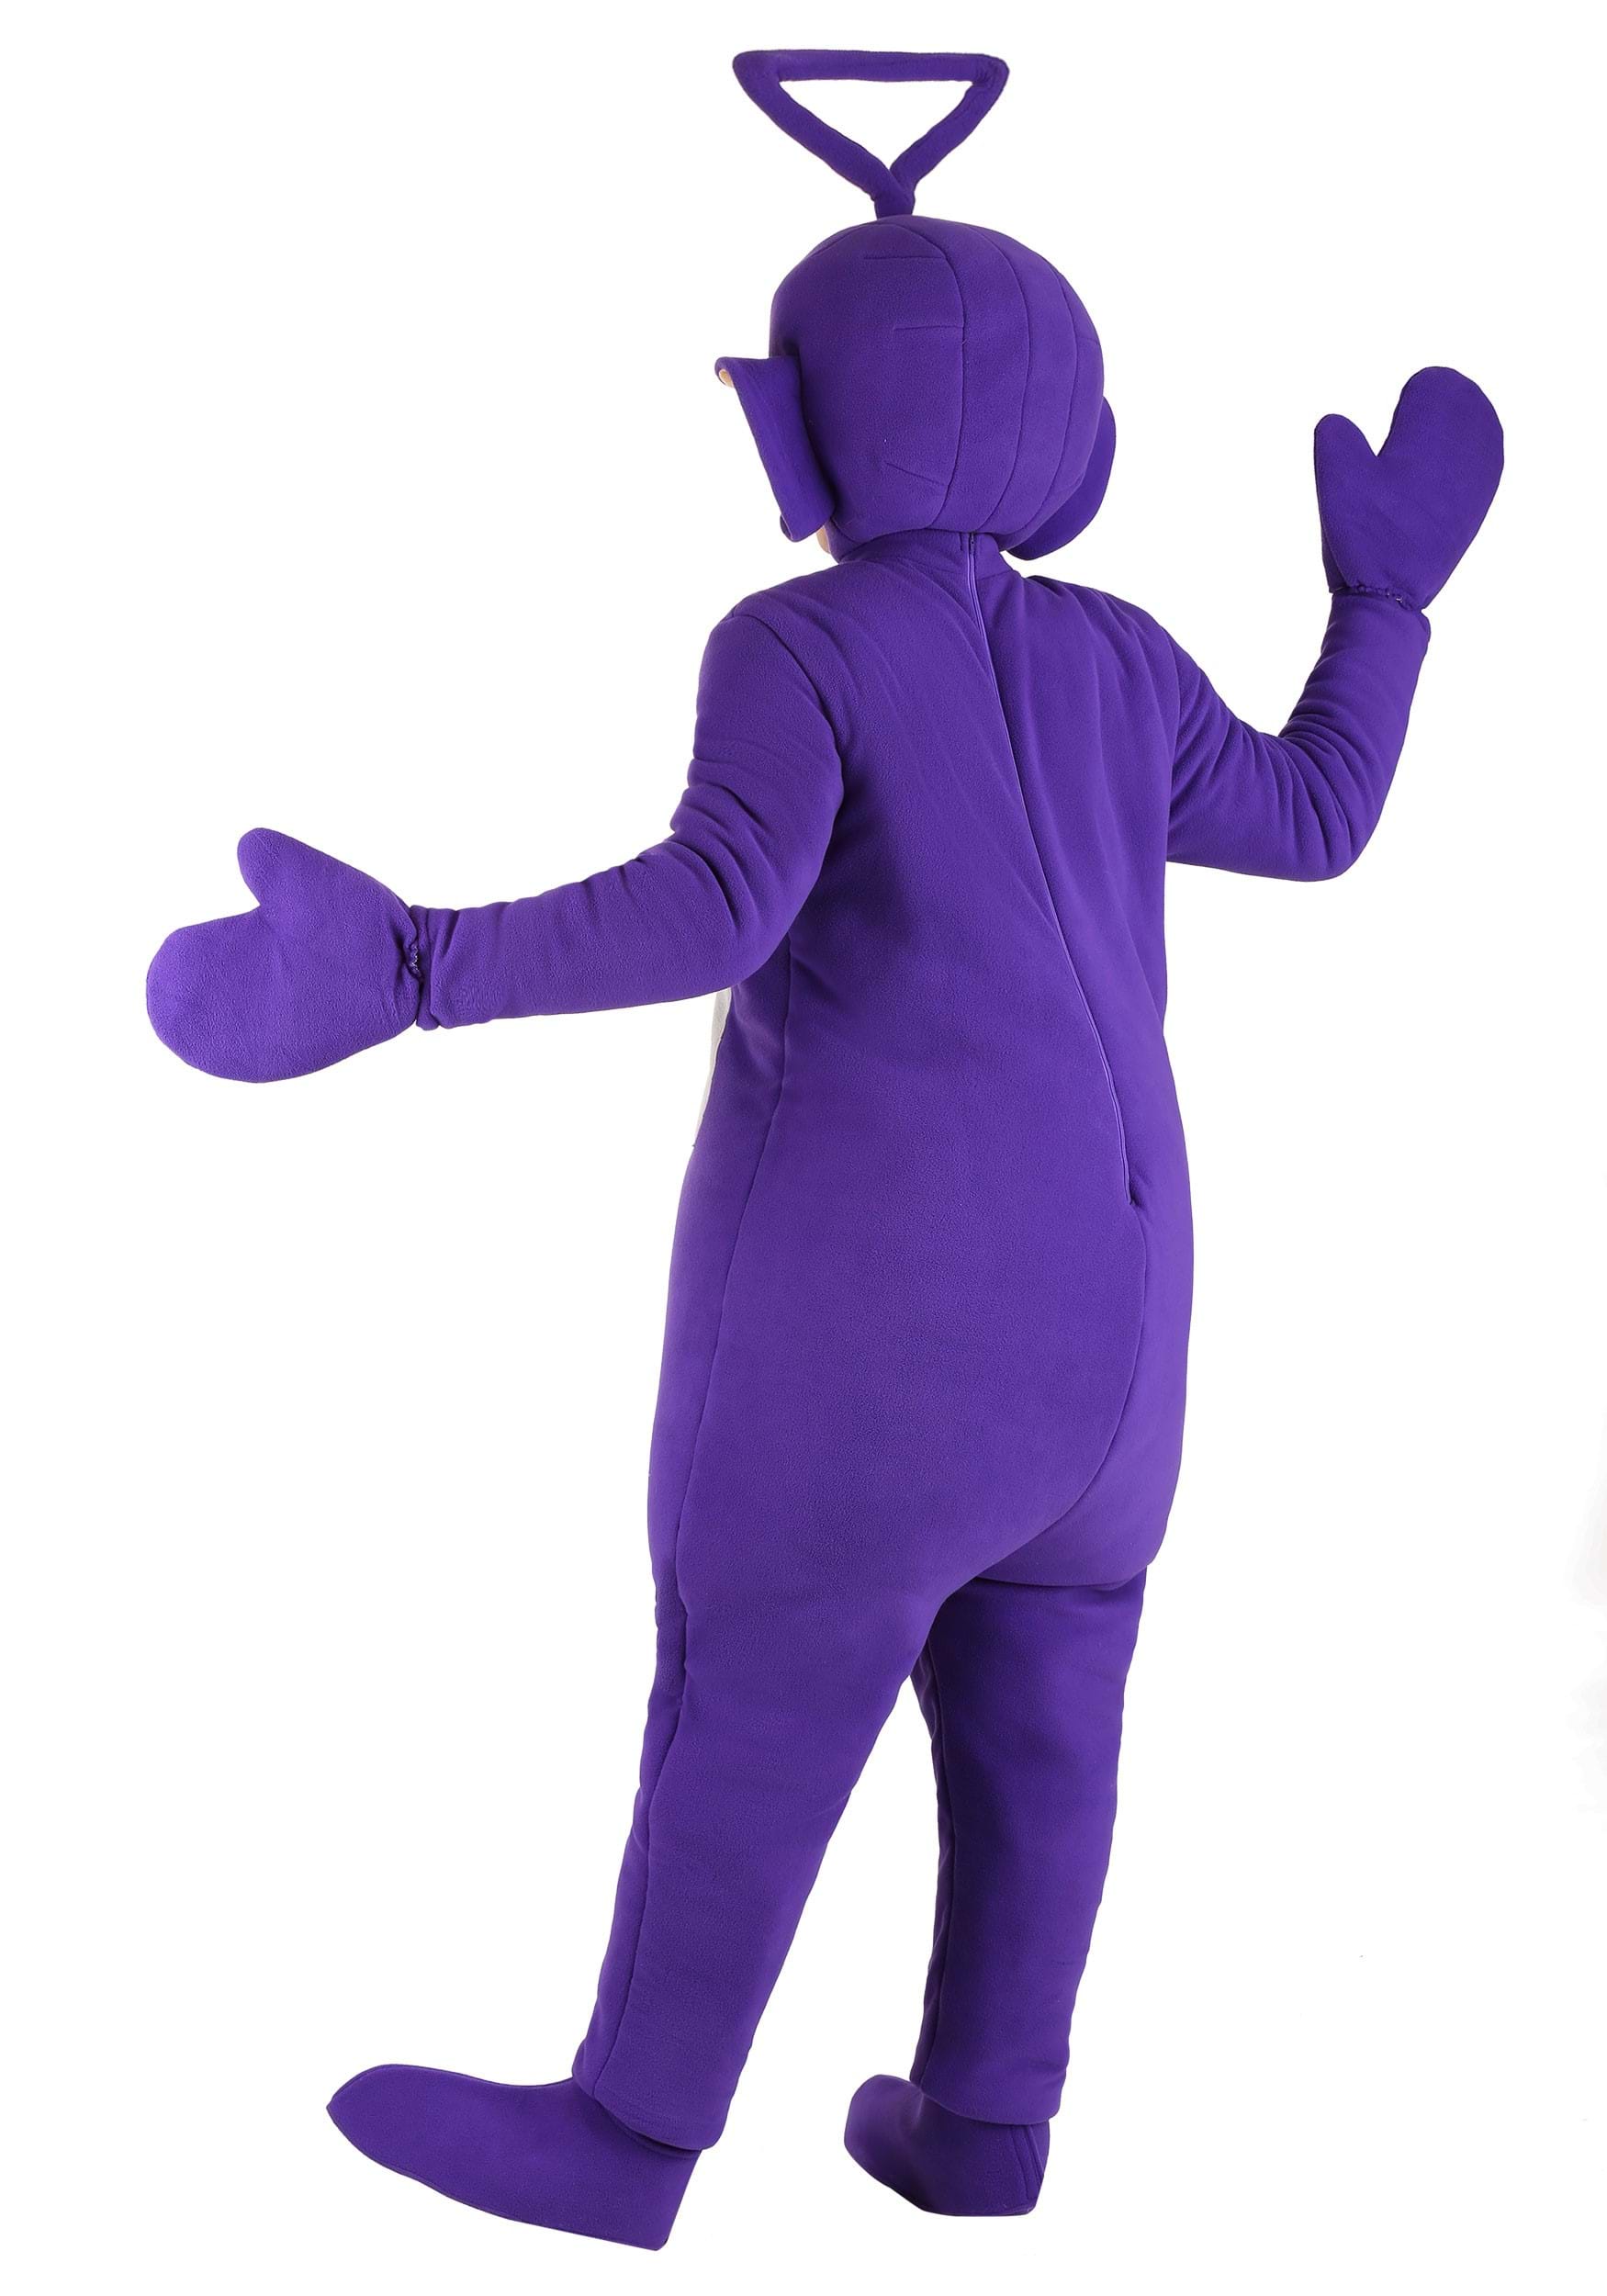 Plus Size Tinky Winky Teletubbies Costume For Adults